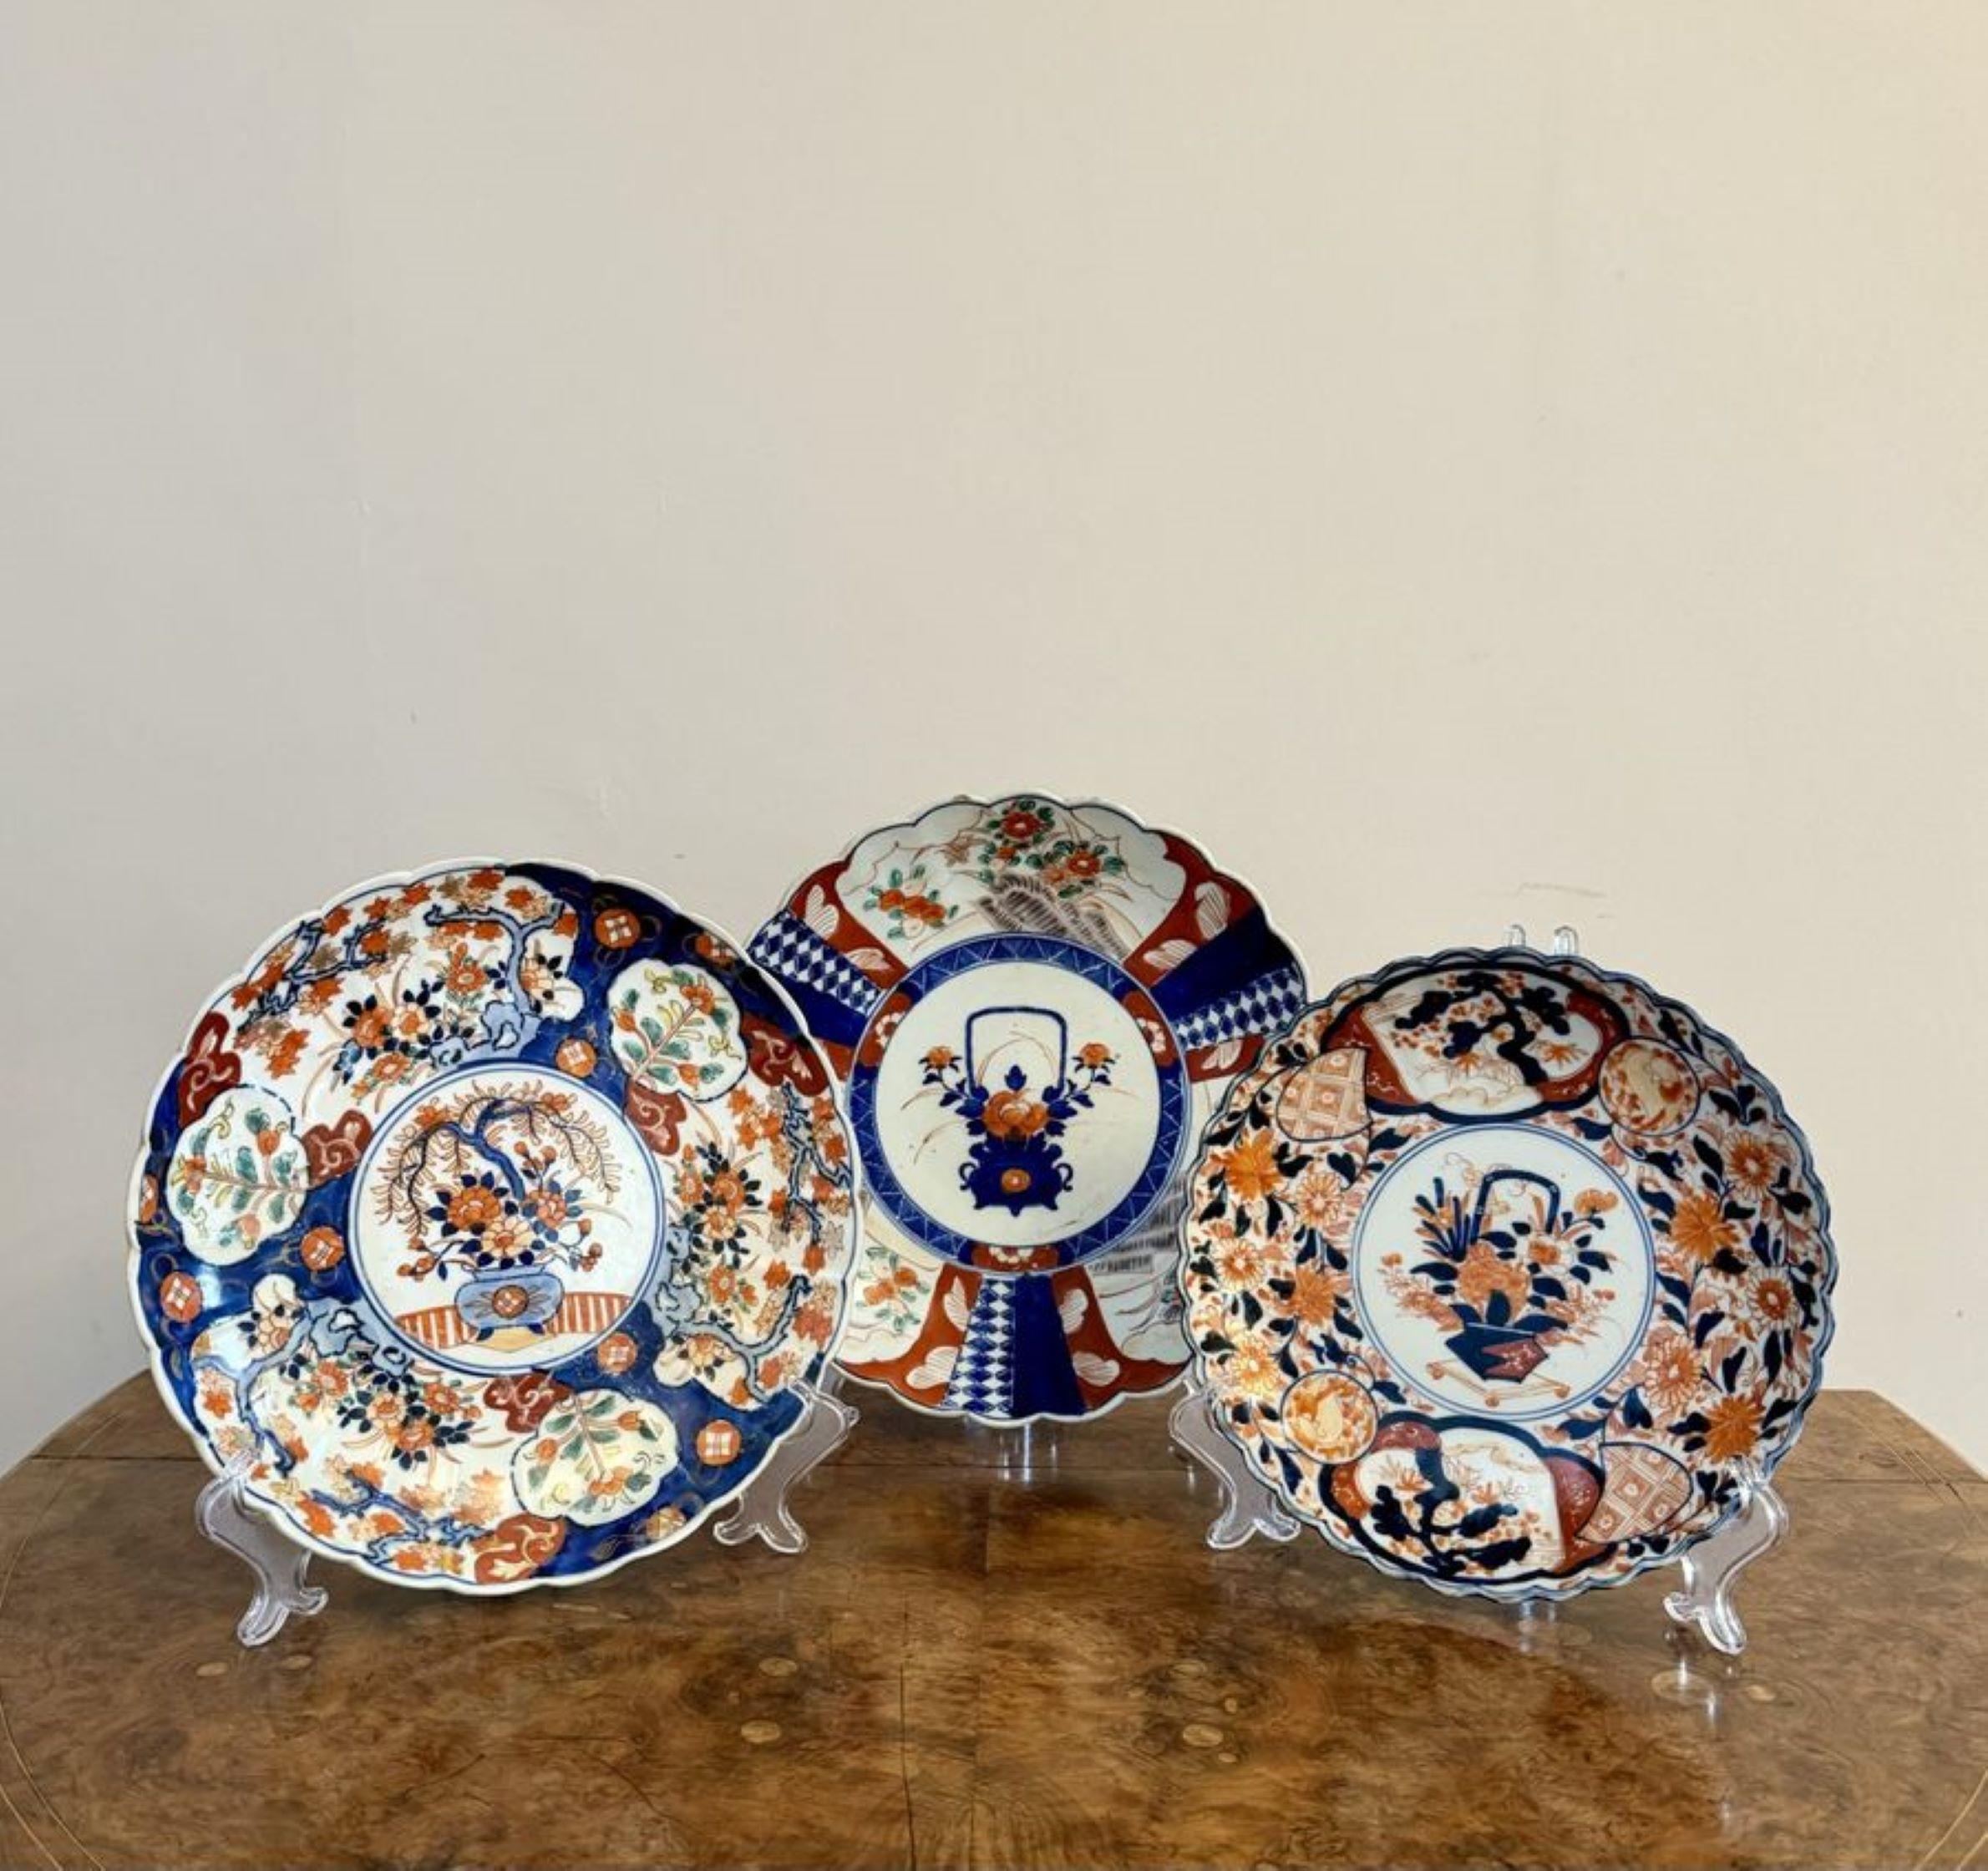 Quality collection of three large antique Japanese imari plates, having three quality large antique Japanese imari plates decorated with flowers, trees, leaves and scrolls hand painted in stunning red, white and blue colours.

Largest plate